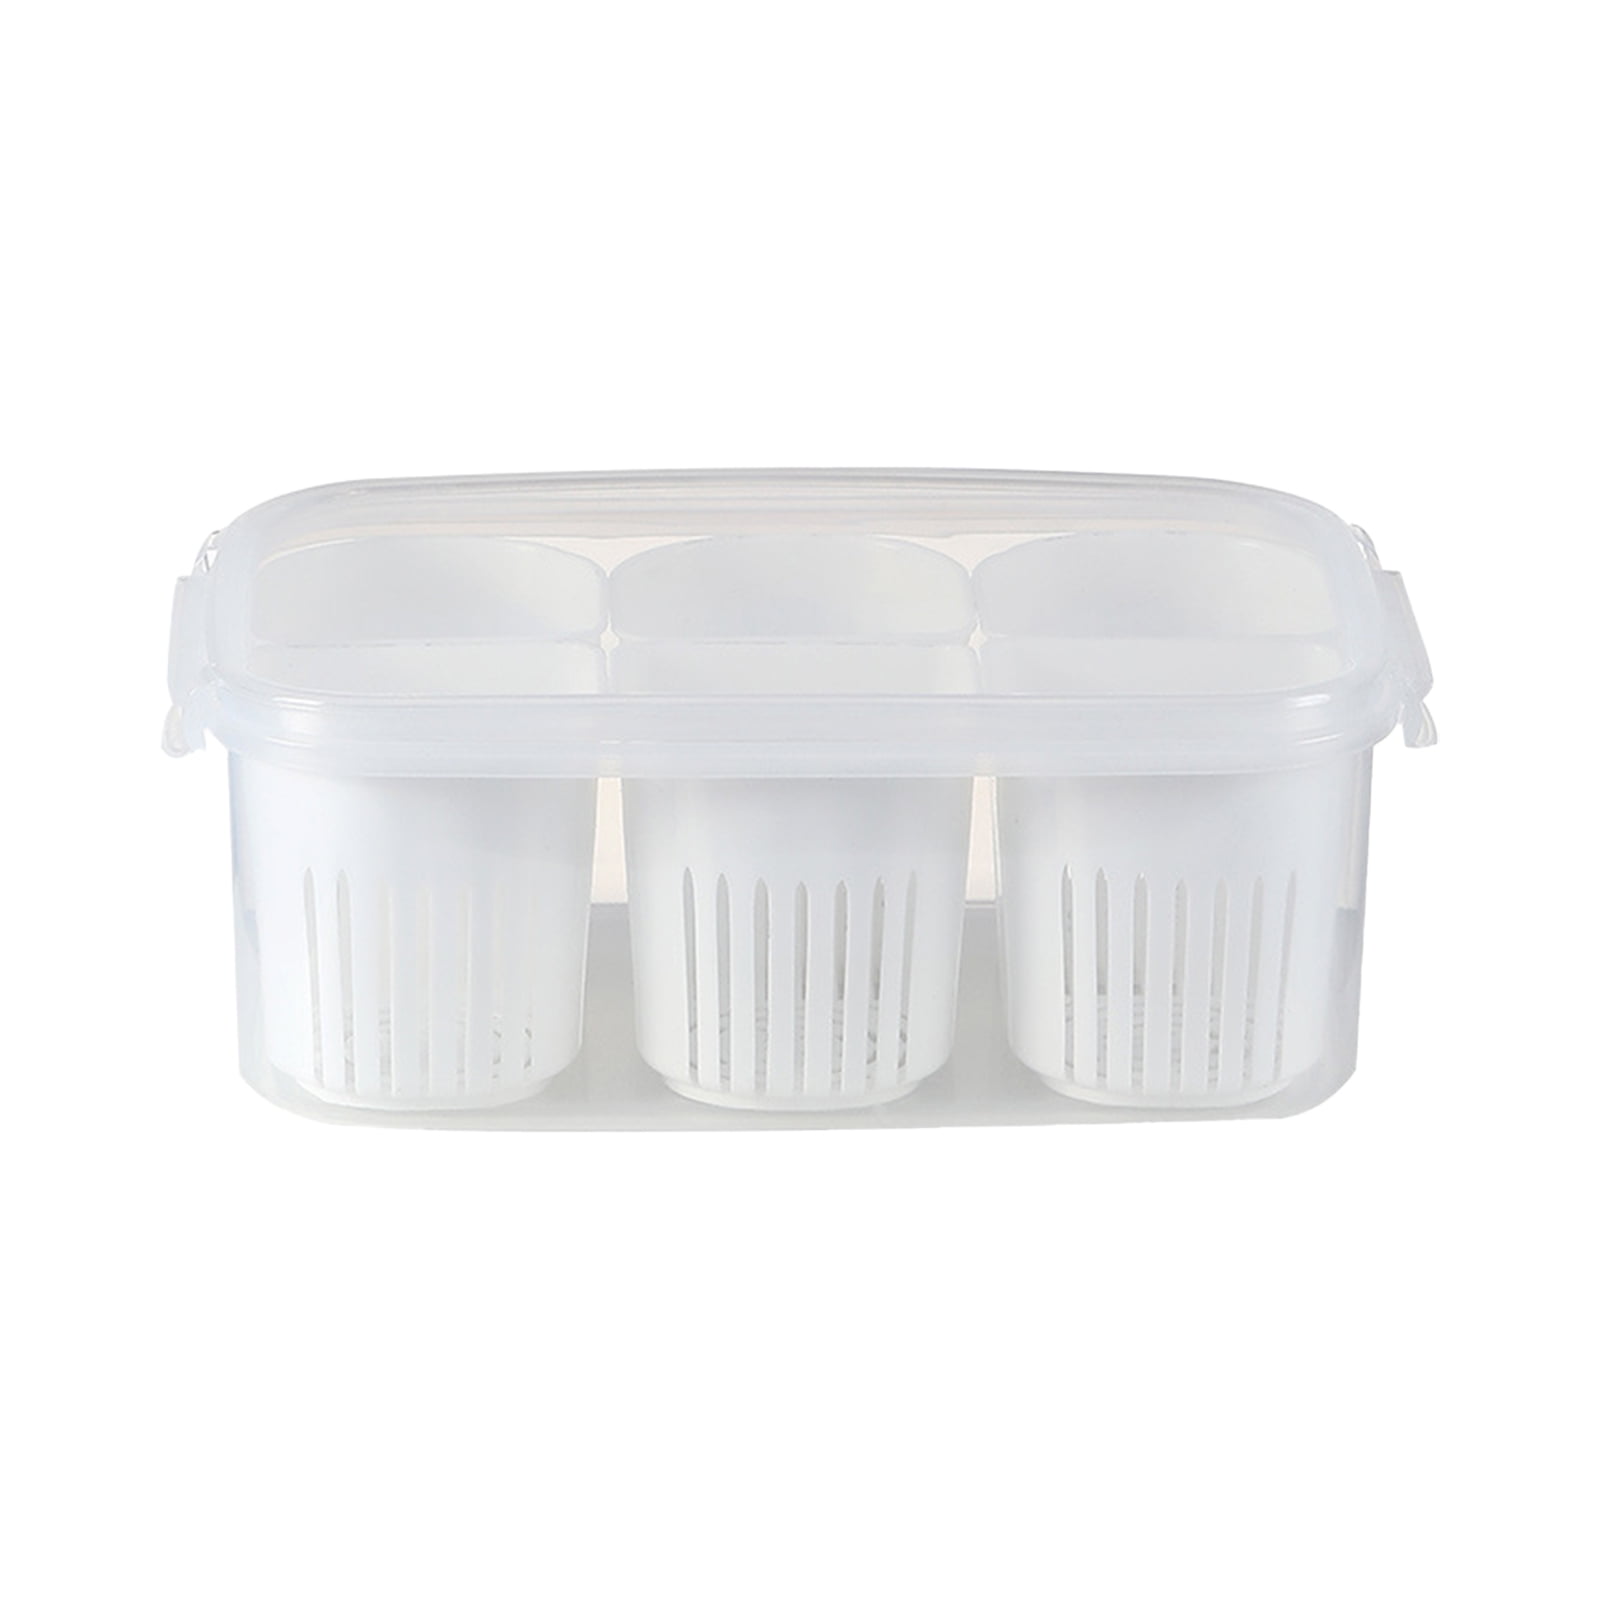 Food Storage Containers with Lid Seal - 6 Compartment Individual